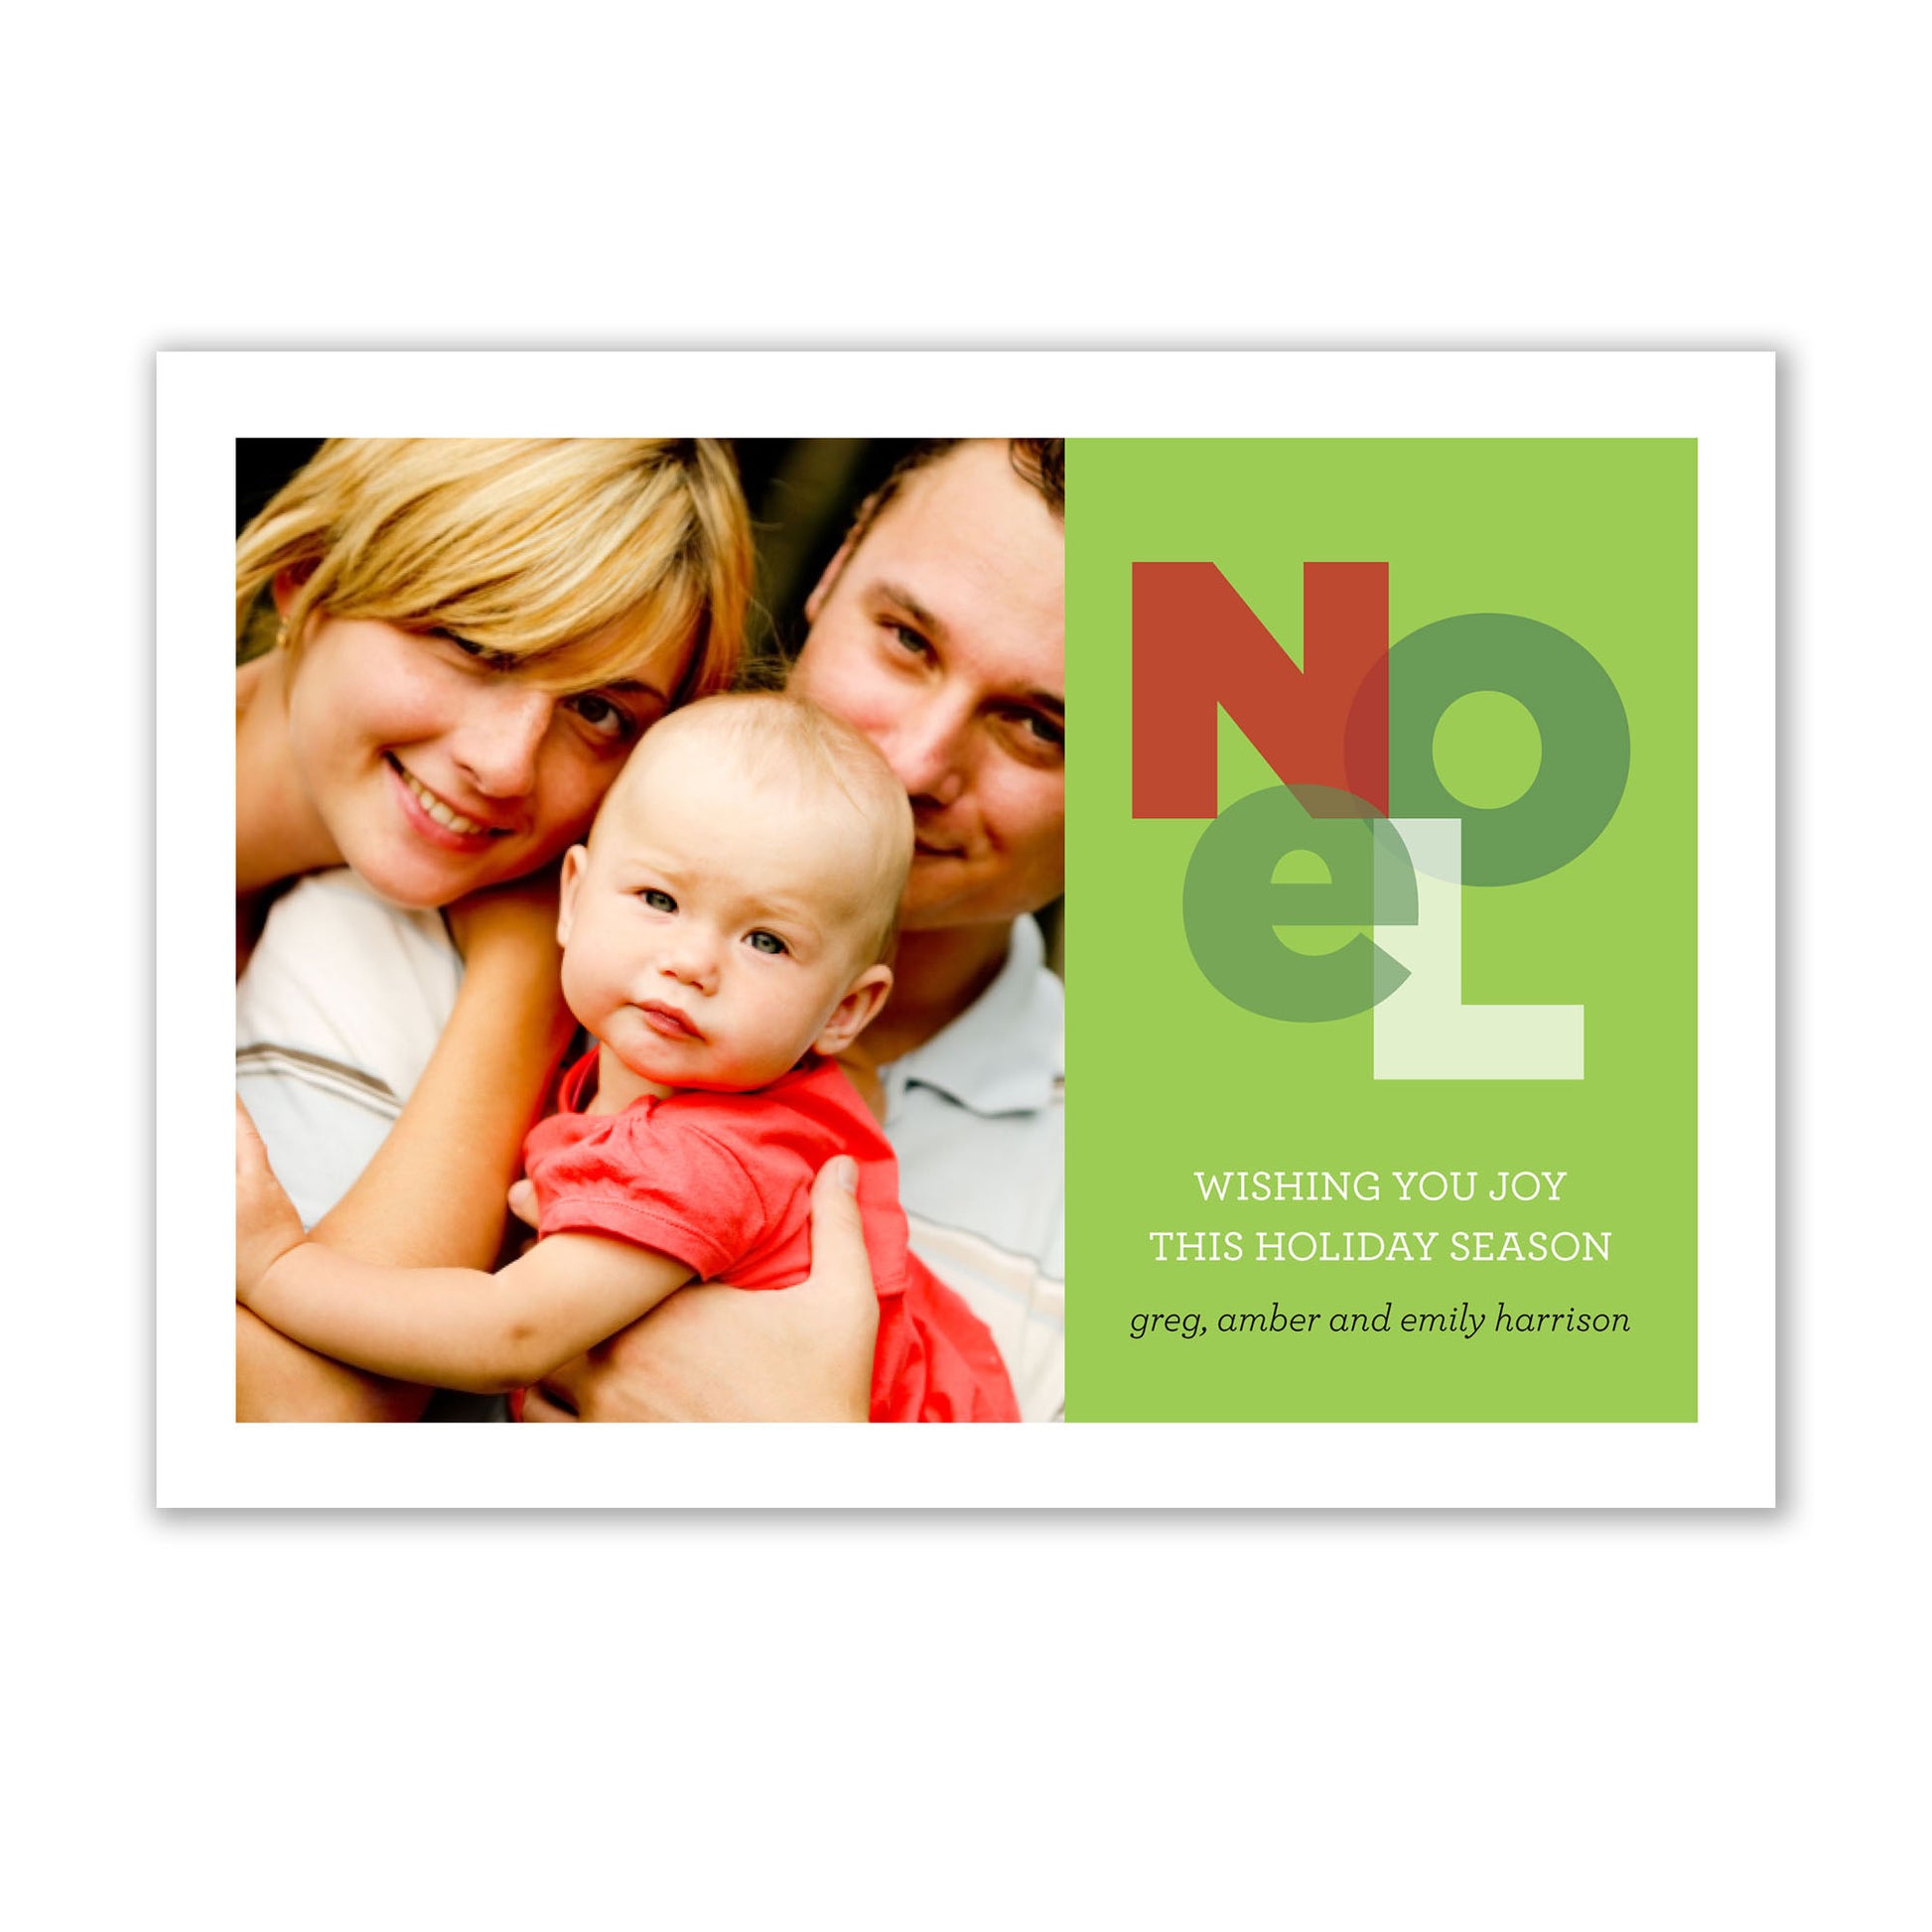 A Modern Noel Photo Card featuring a family holding a baby, complete with white unlined envelopes, by Noteworthy.